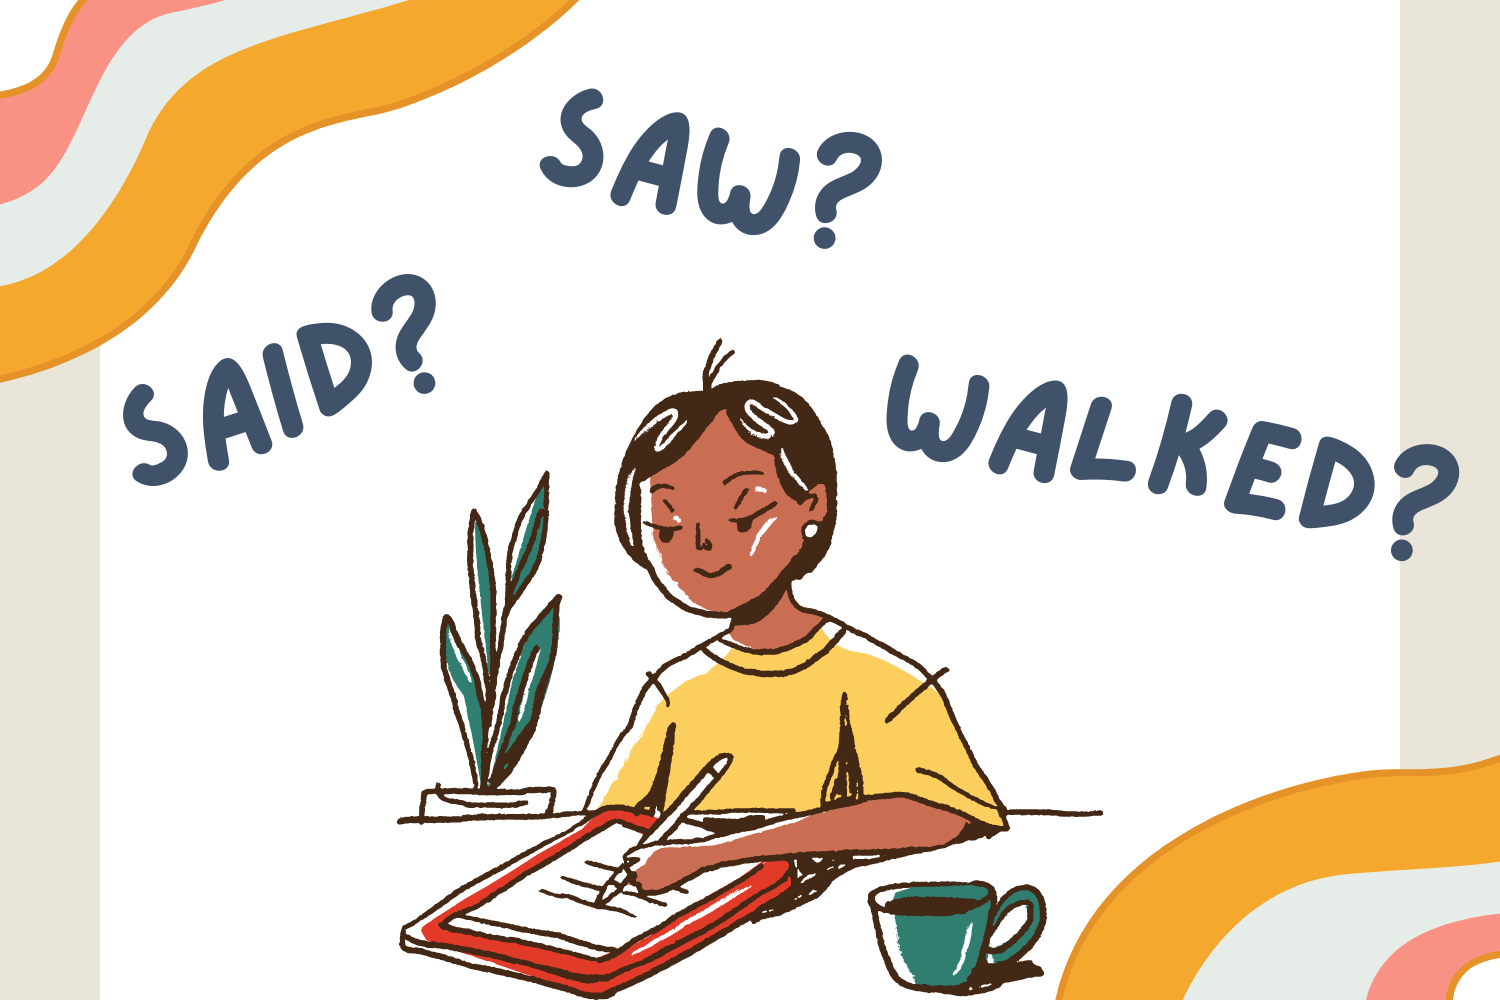 PSLE Composition Writing: Say no to boring vocabulary! Use good, precise and descriptive vocabulary in your writing. Avoid repeating words like 'said', 'saw' and 'walked'!